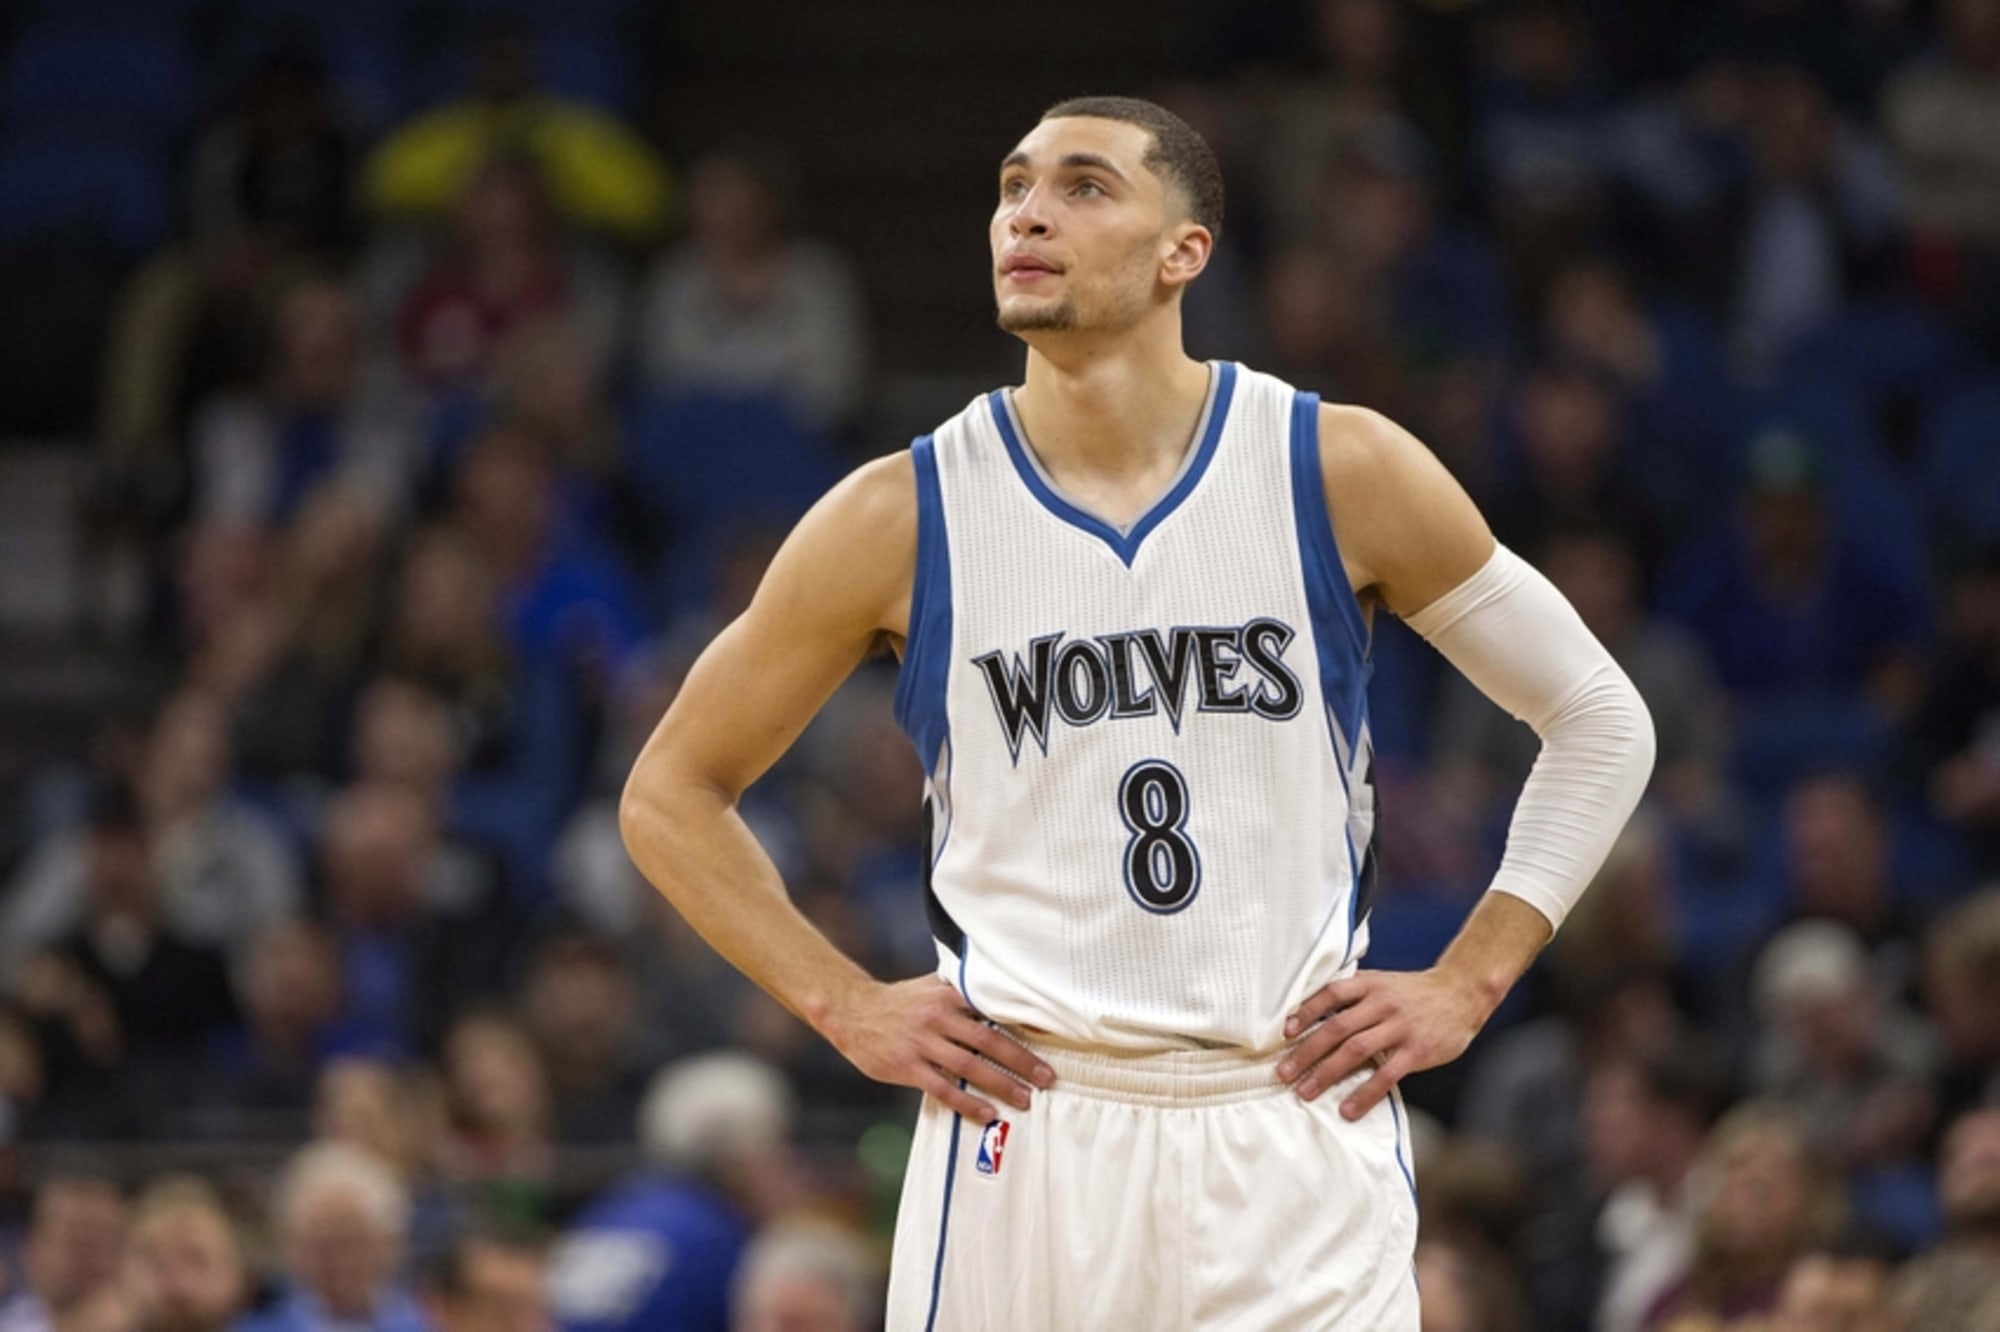 Zach LaVine may be the real key to unlocking Timberwolves' ridiculous  potential